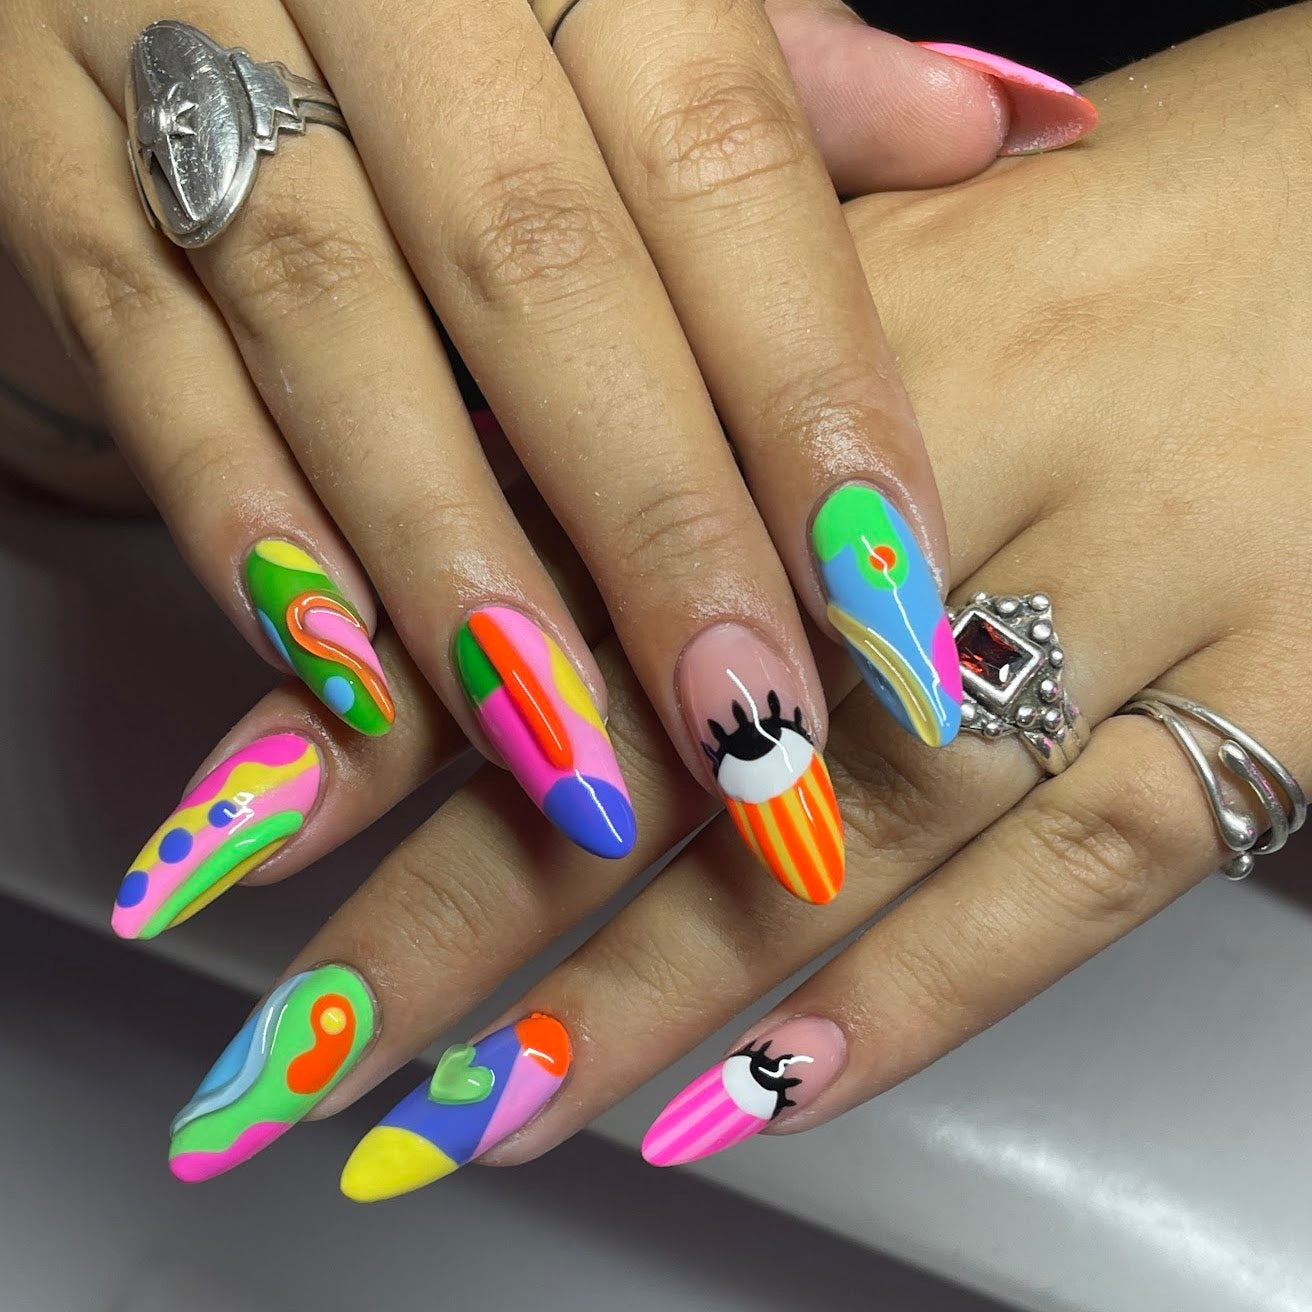 Picasso style nails with many gel polish colors